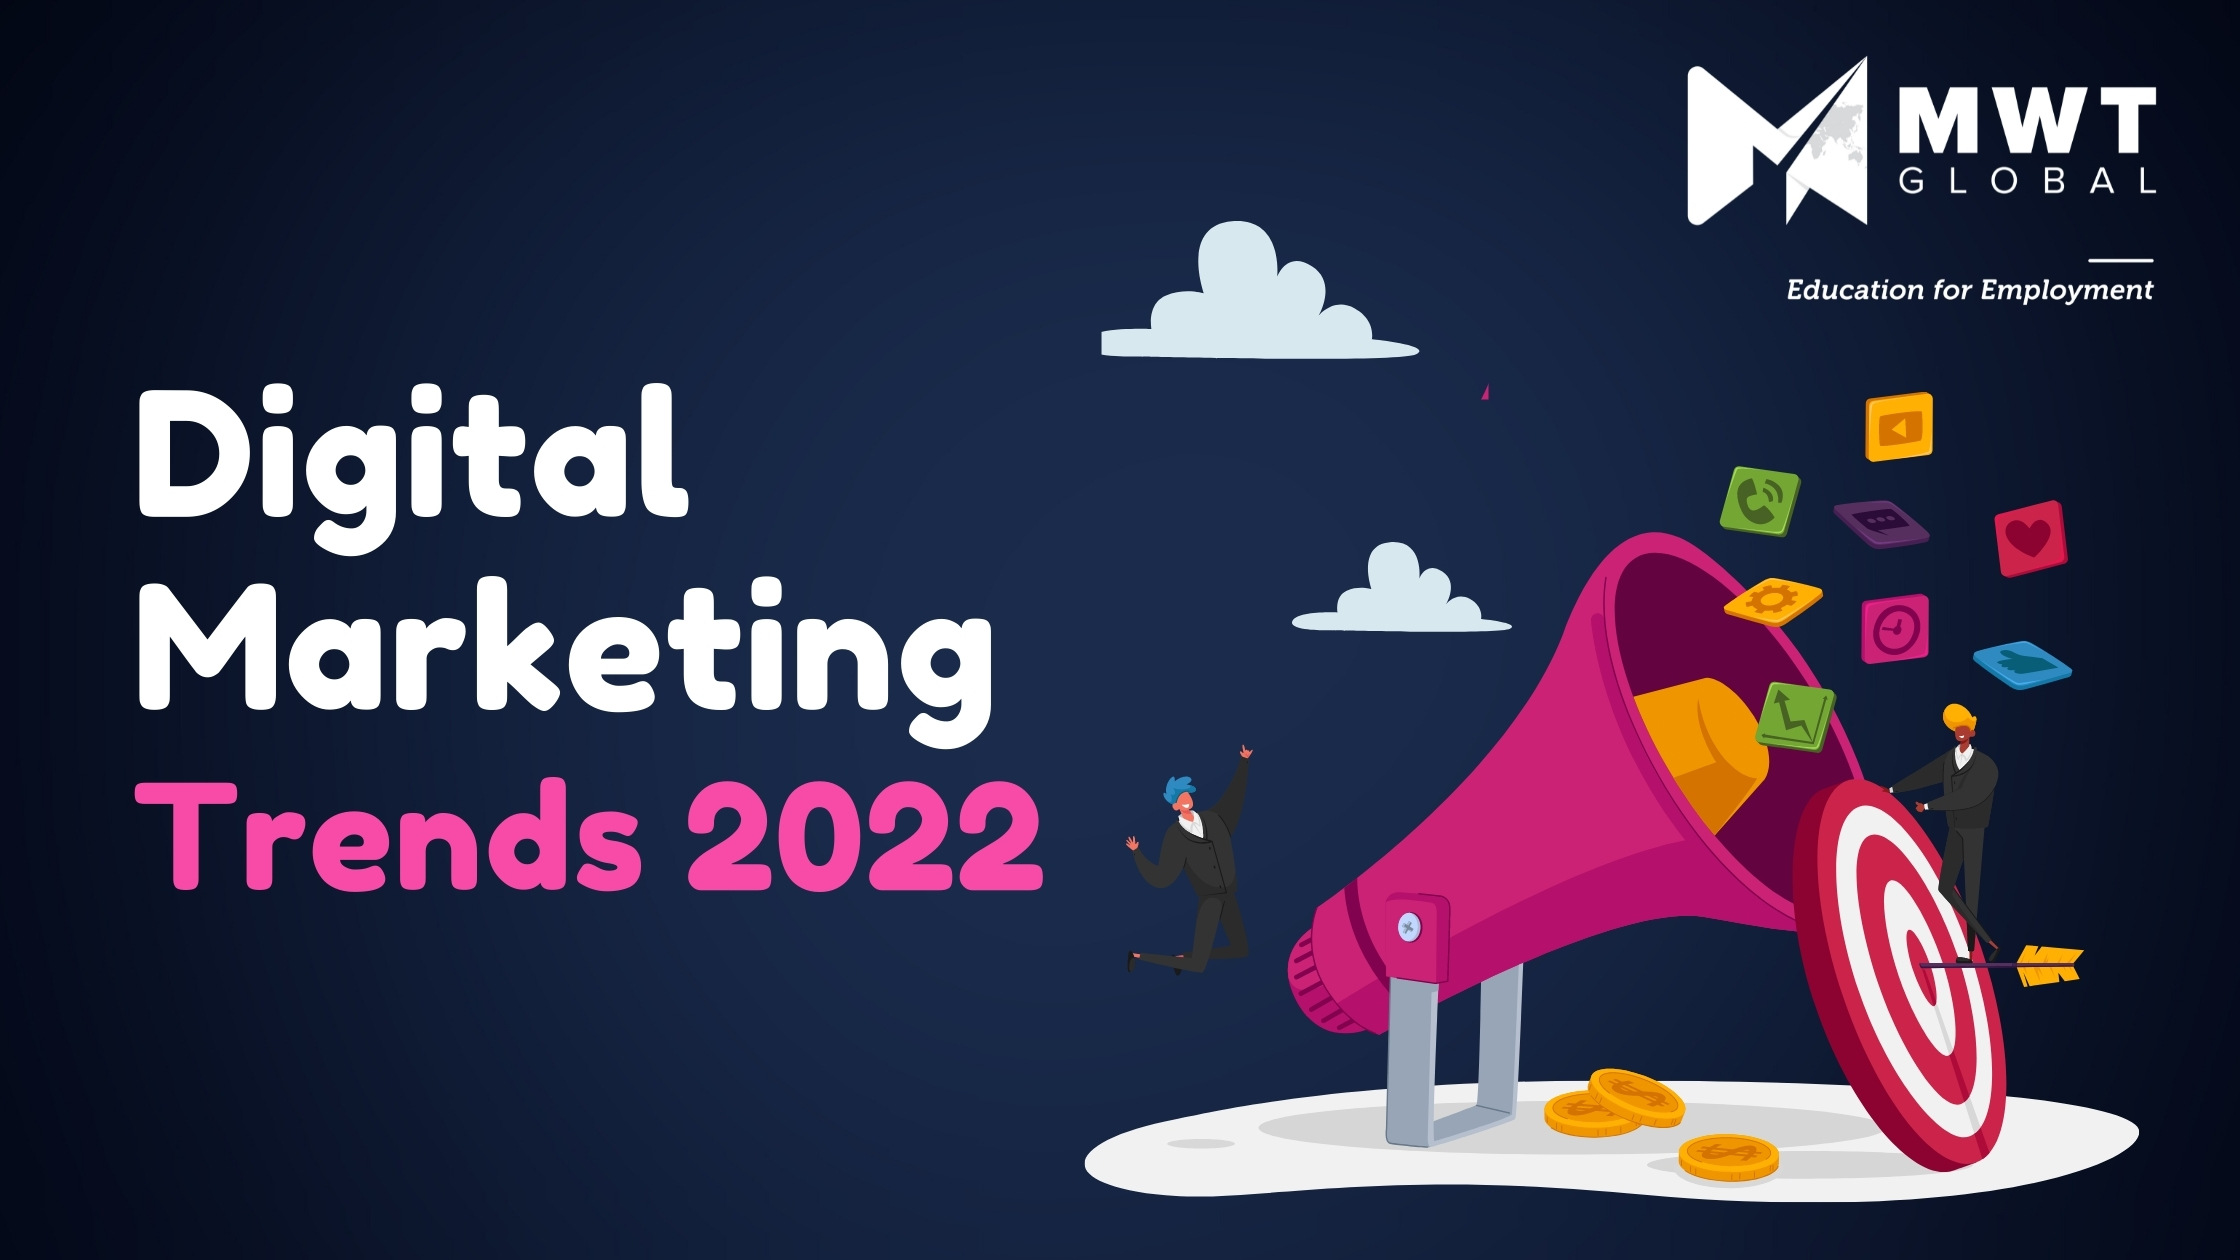 What are the Top Digital Marketing Trends of 2022